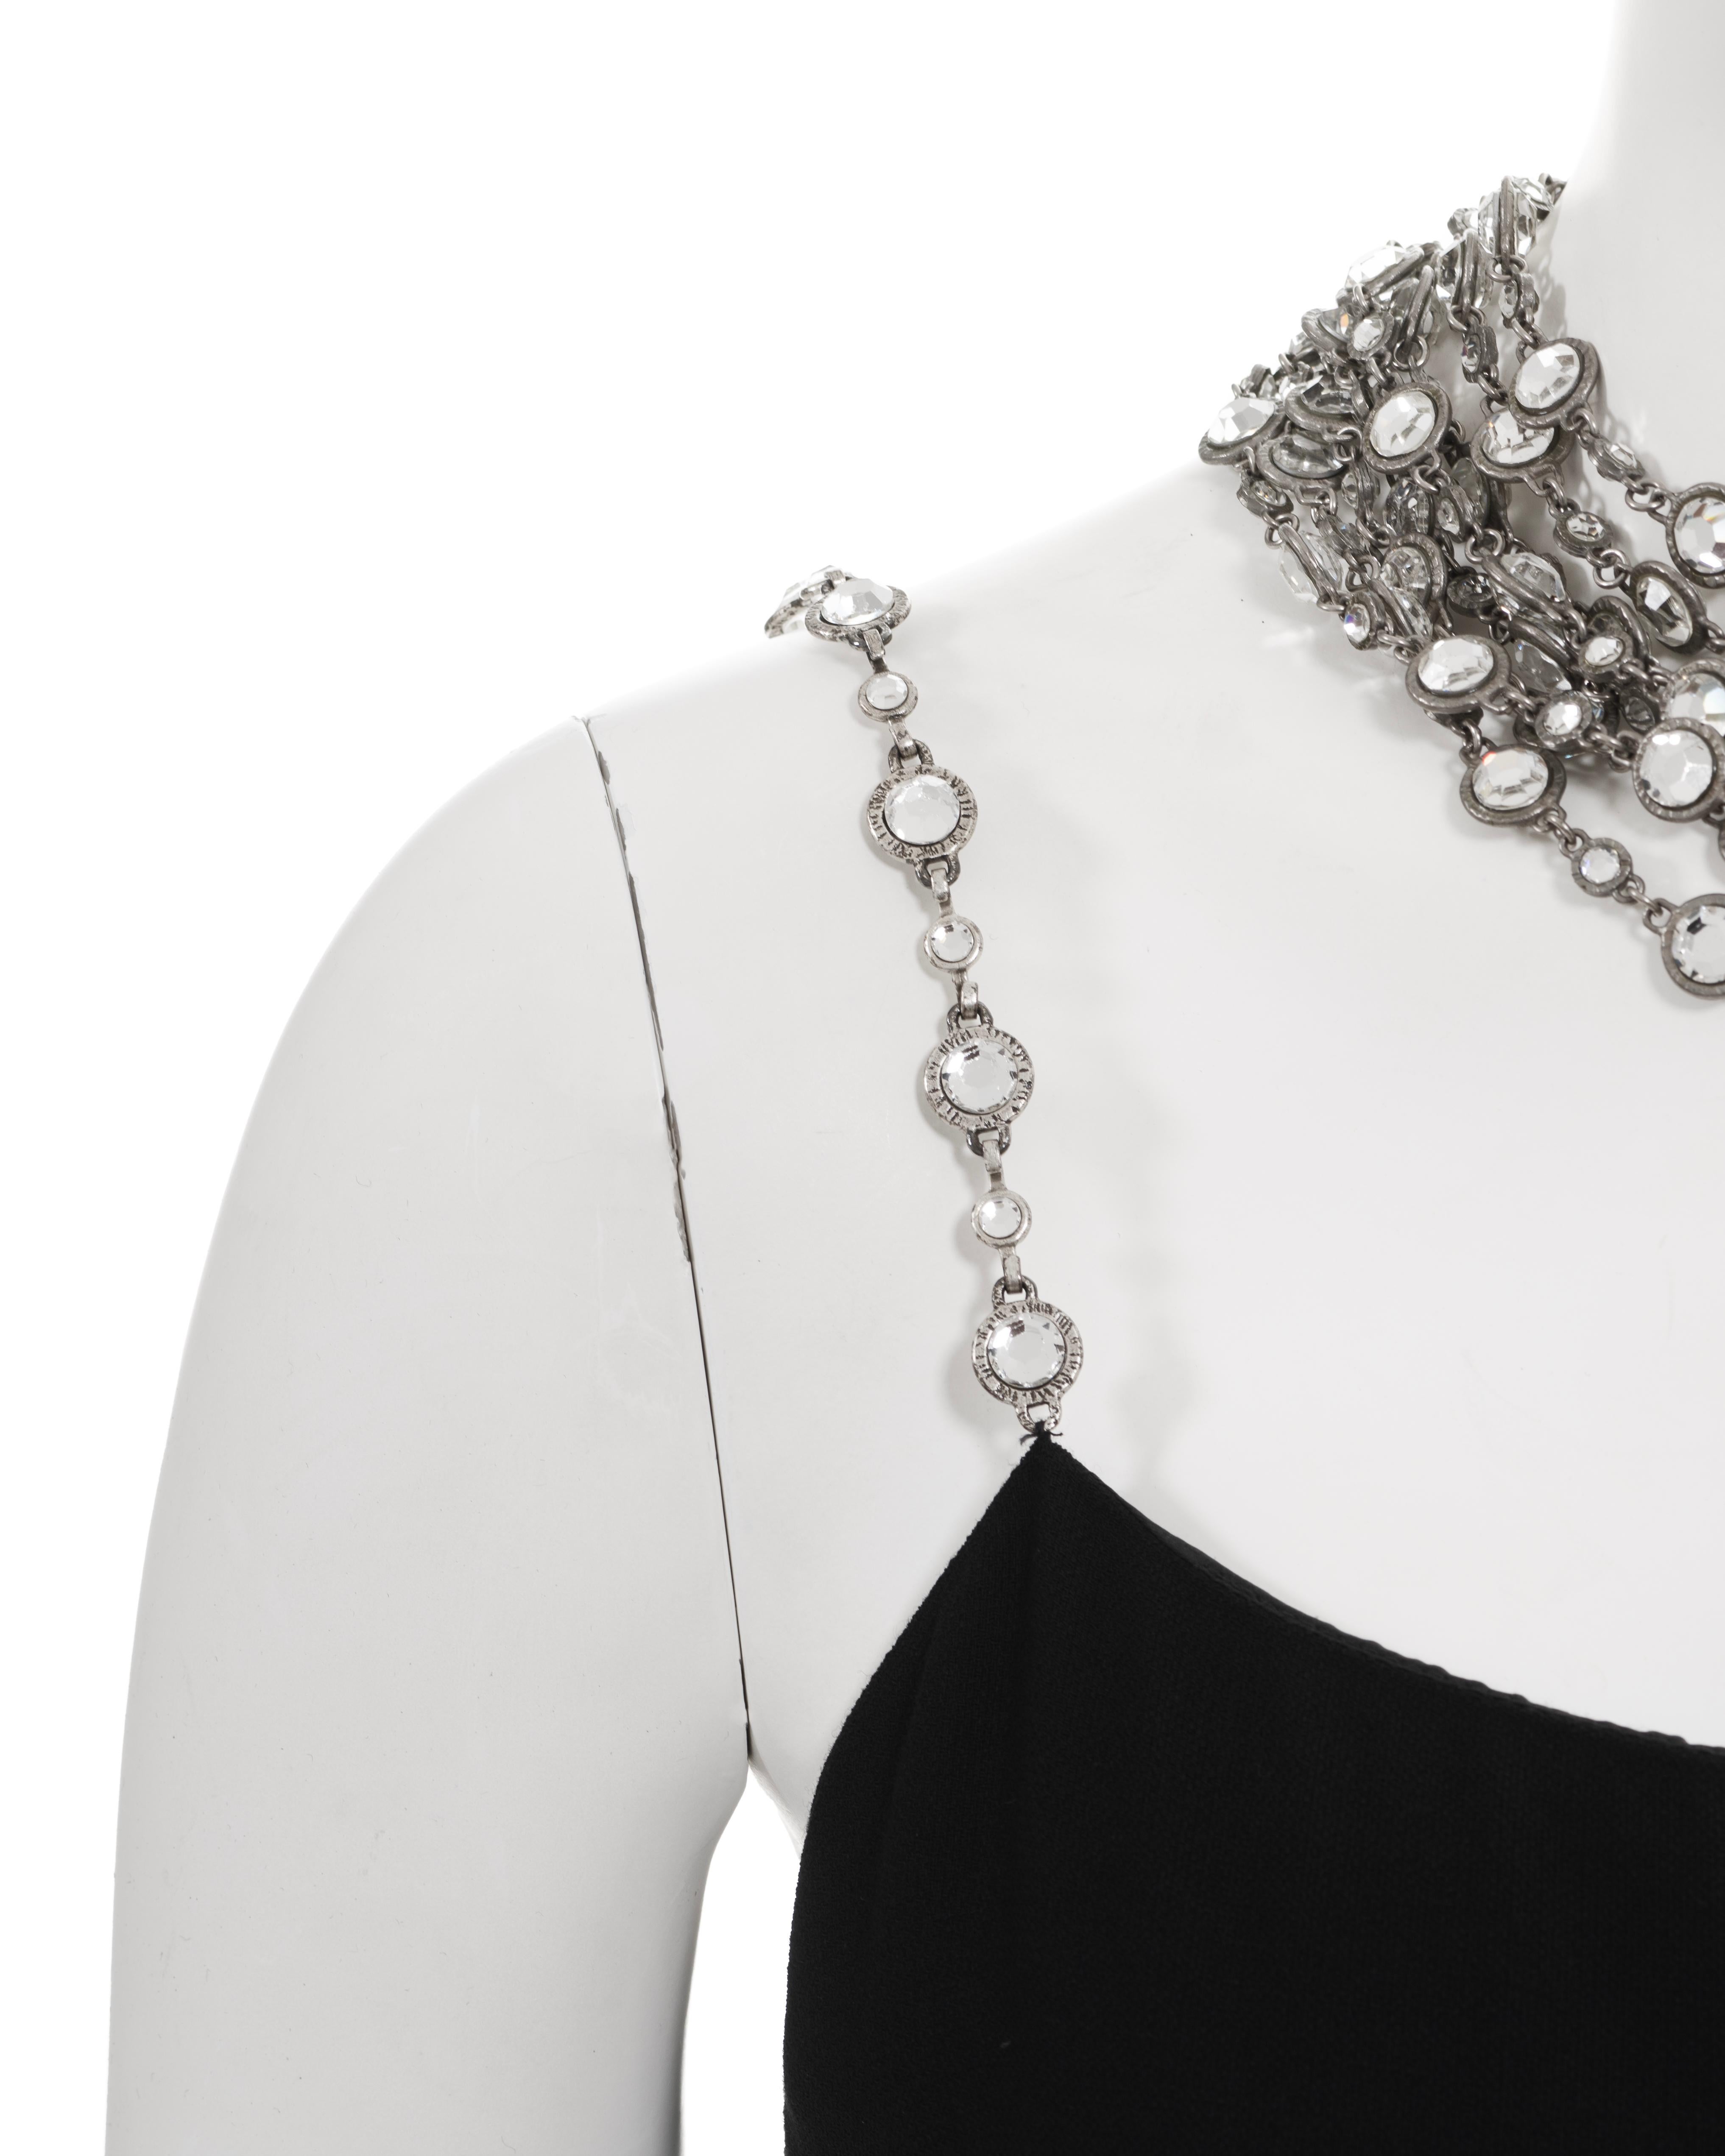 Chanel by Karl Lagerfeld black evening dress with crystal jewellery set, ss 1998 For Sale 3